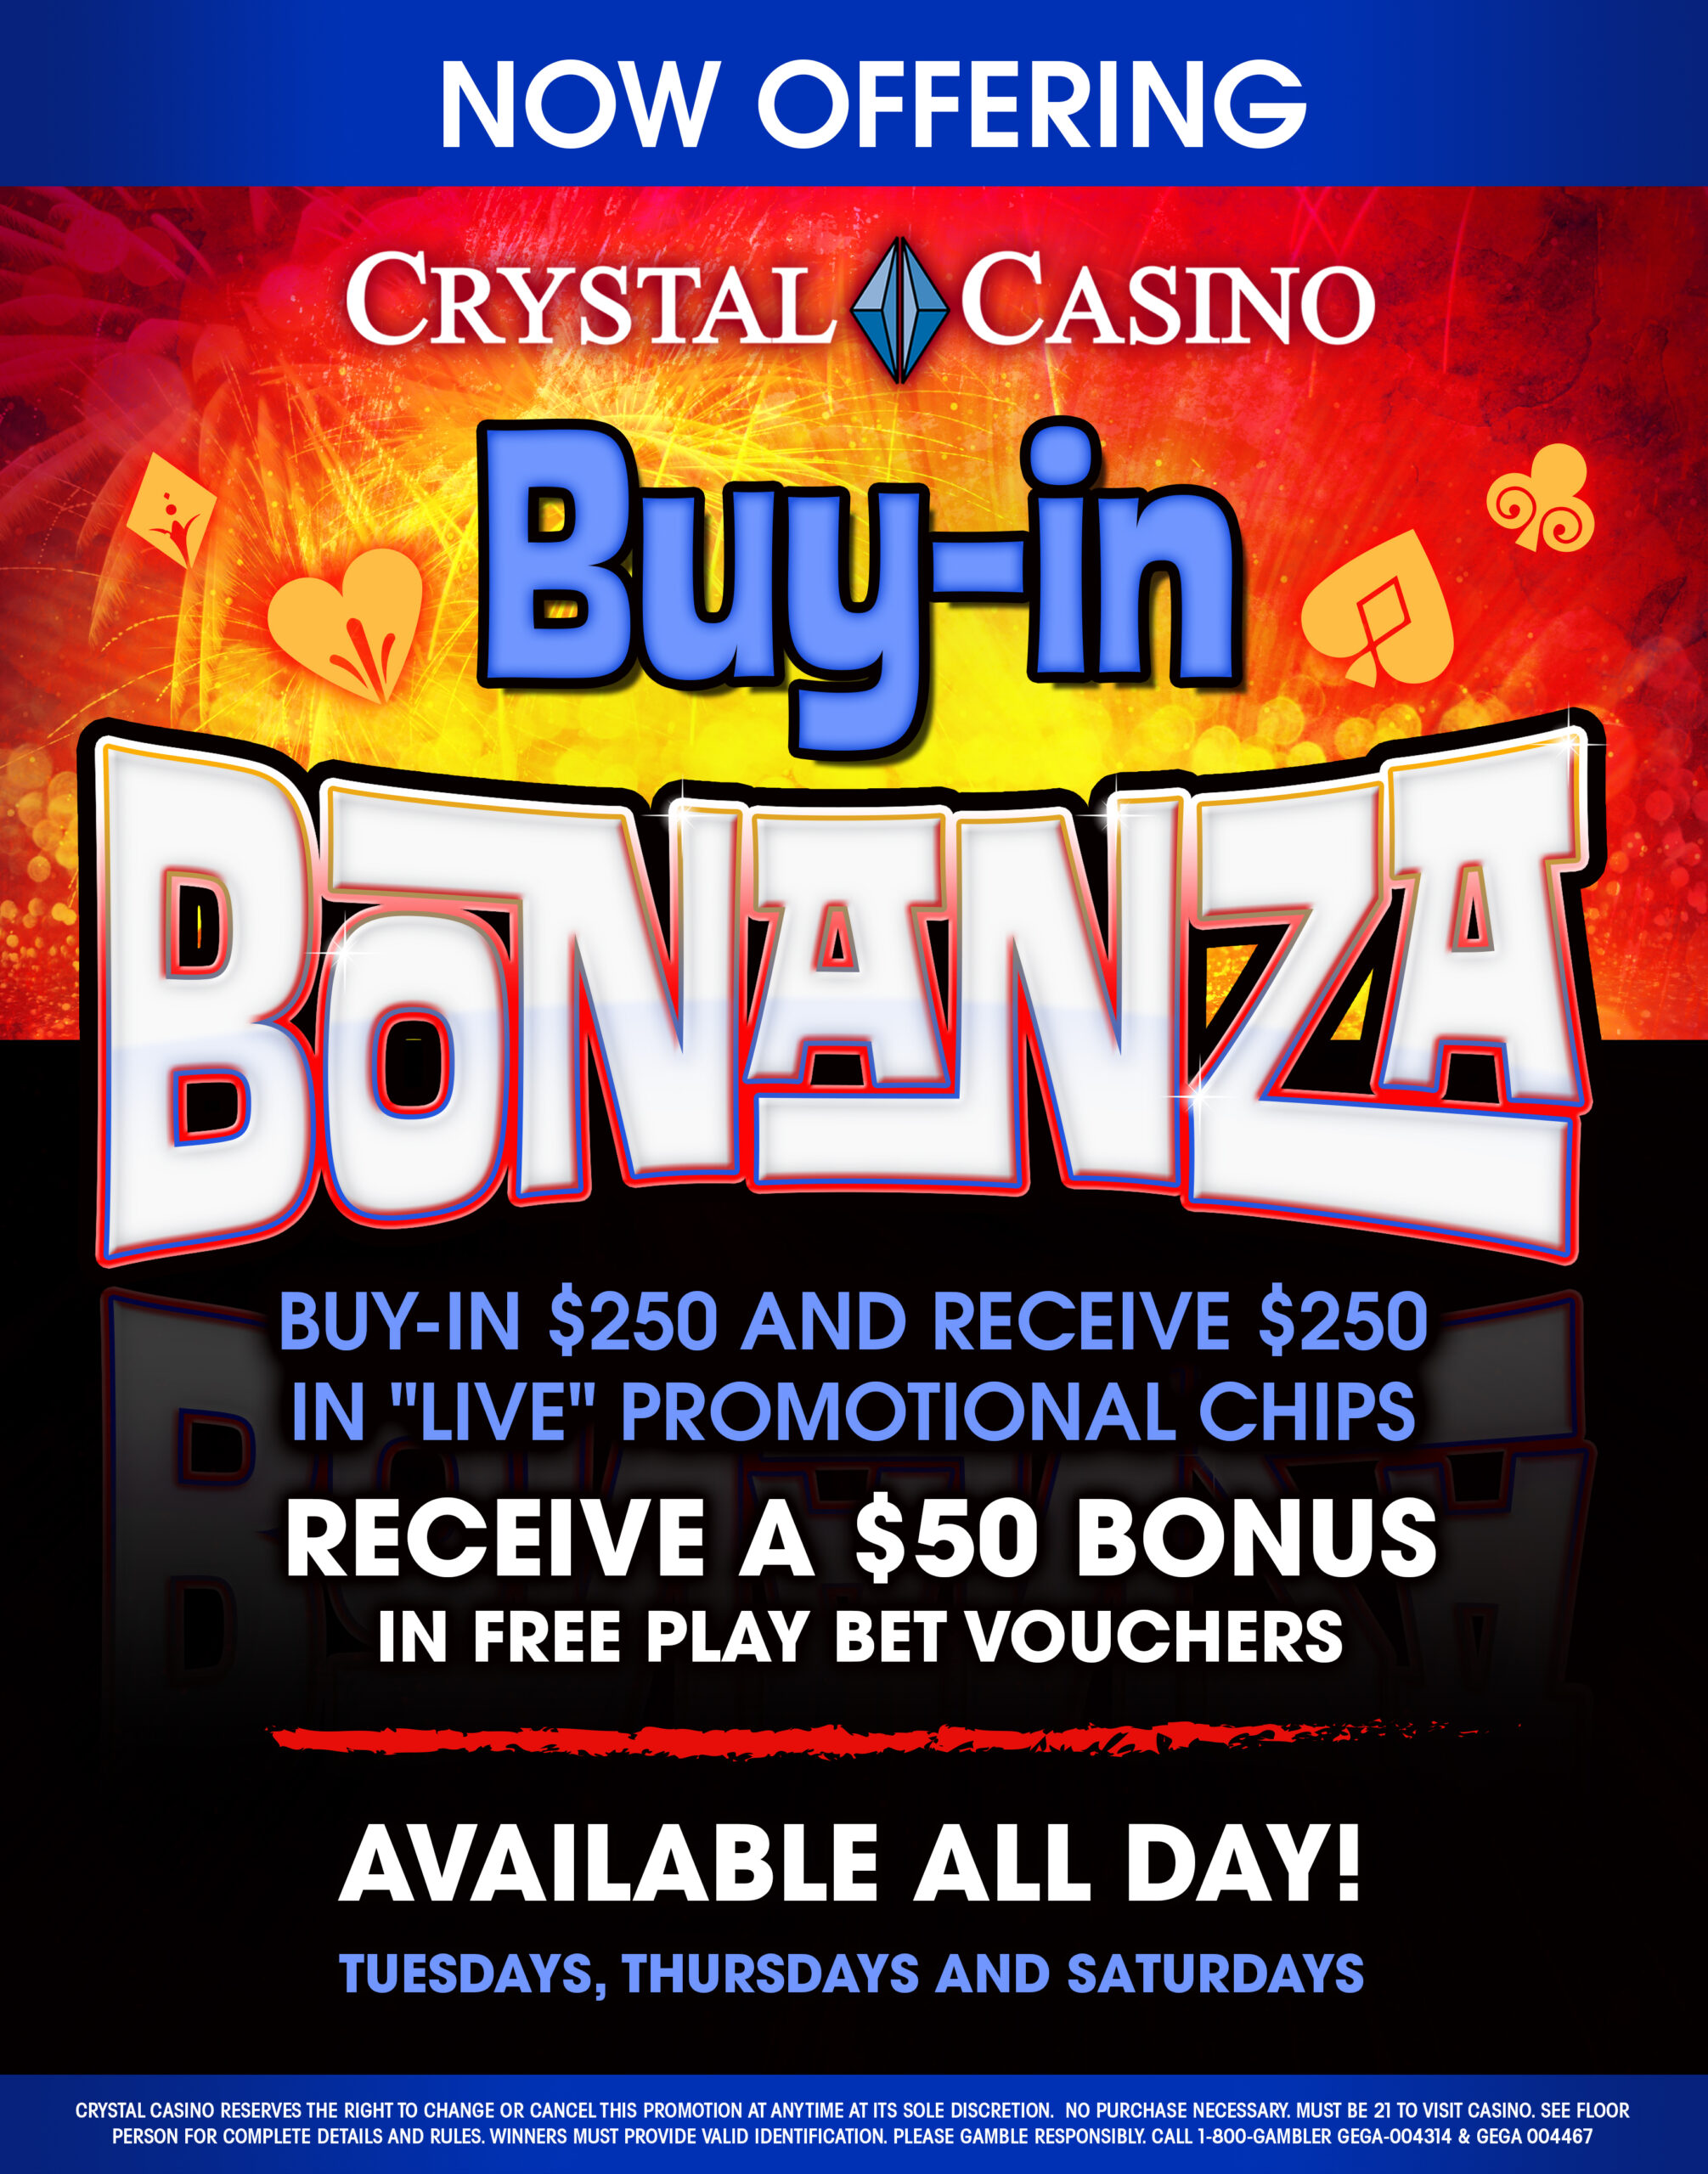 BUY-IN $250 AND RECEIVE $250 IN "LIVE" PROMOTIONAL CHIPS PLUS $50 BONUS IN FREE PLAY BET VOUCHERS. TEUSDAY, THURSDAY, AND SATURDAY